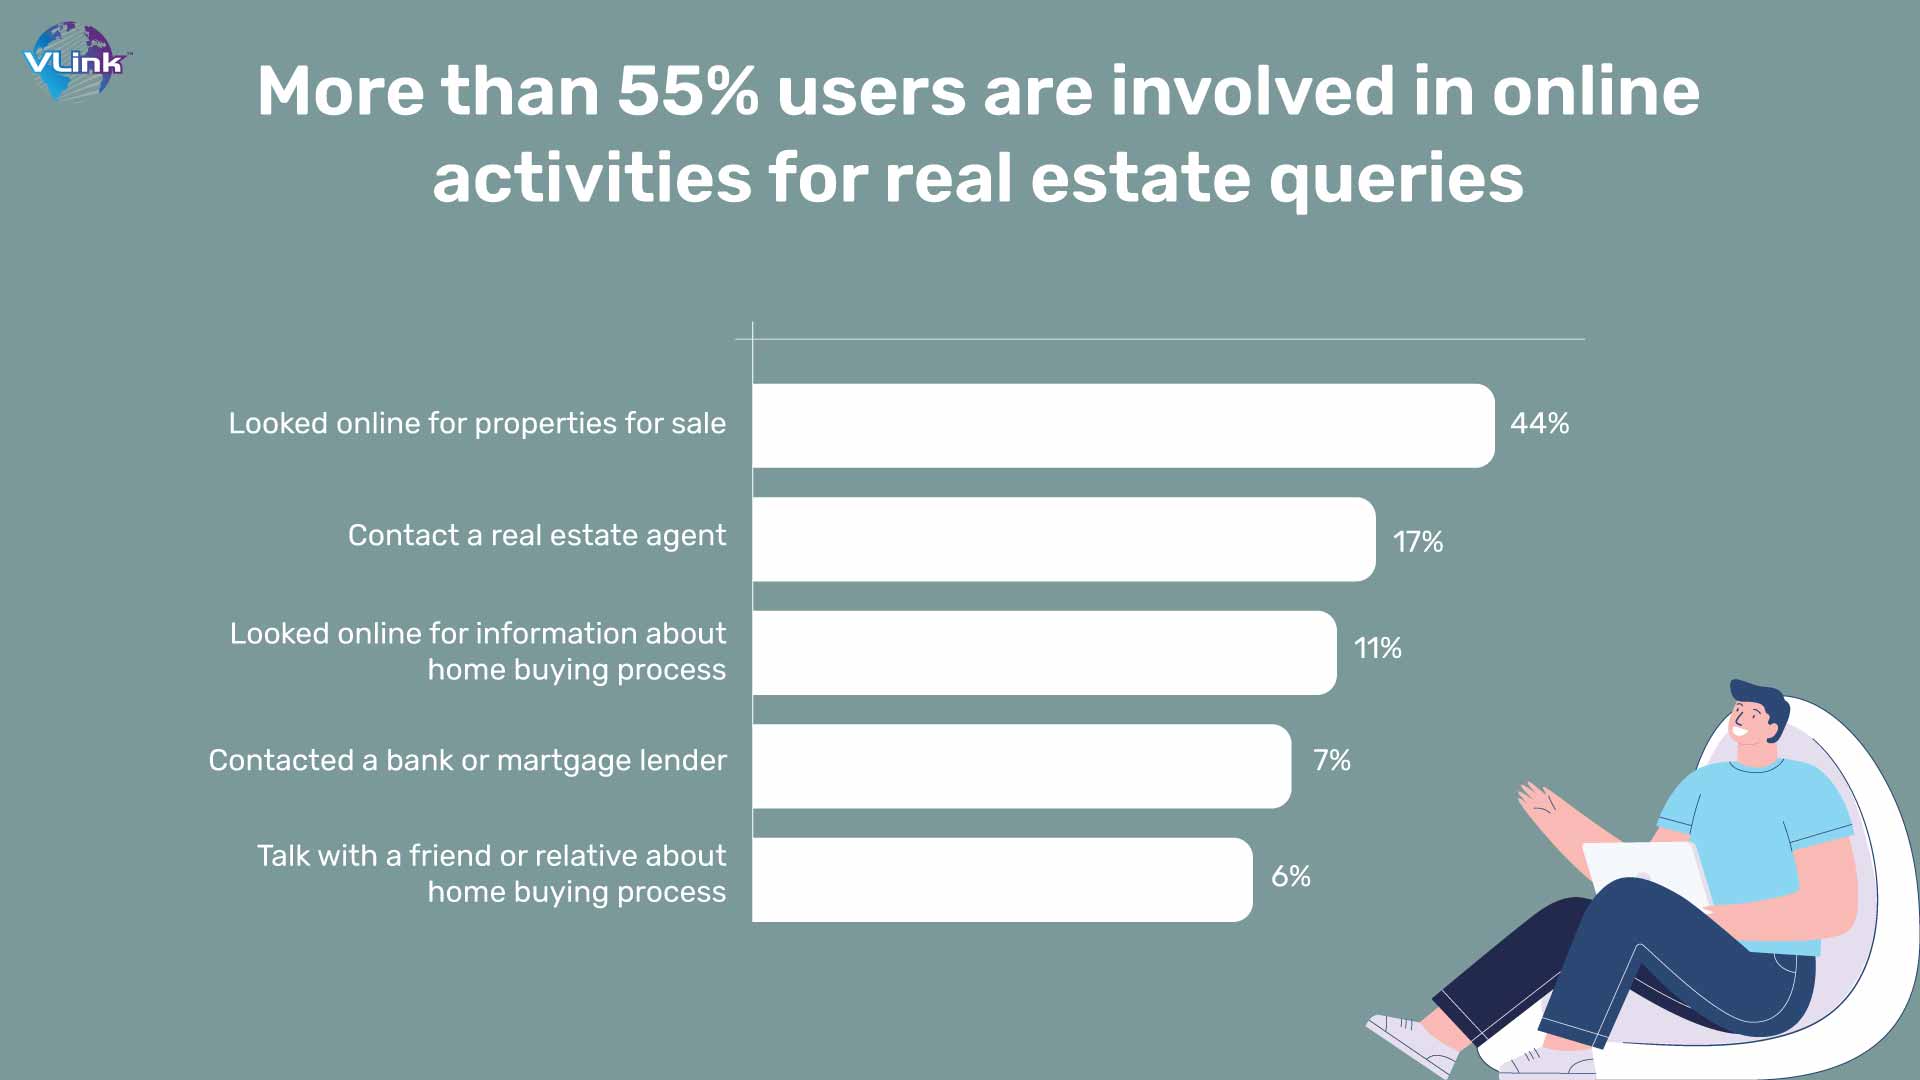 More than 55% users are involved in online activities for real estate queries